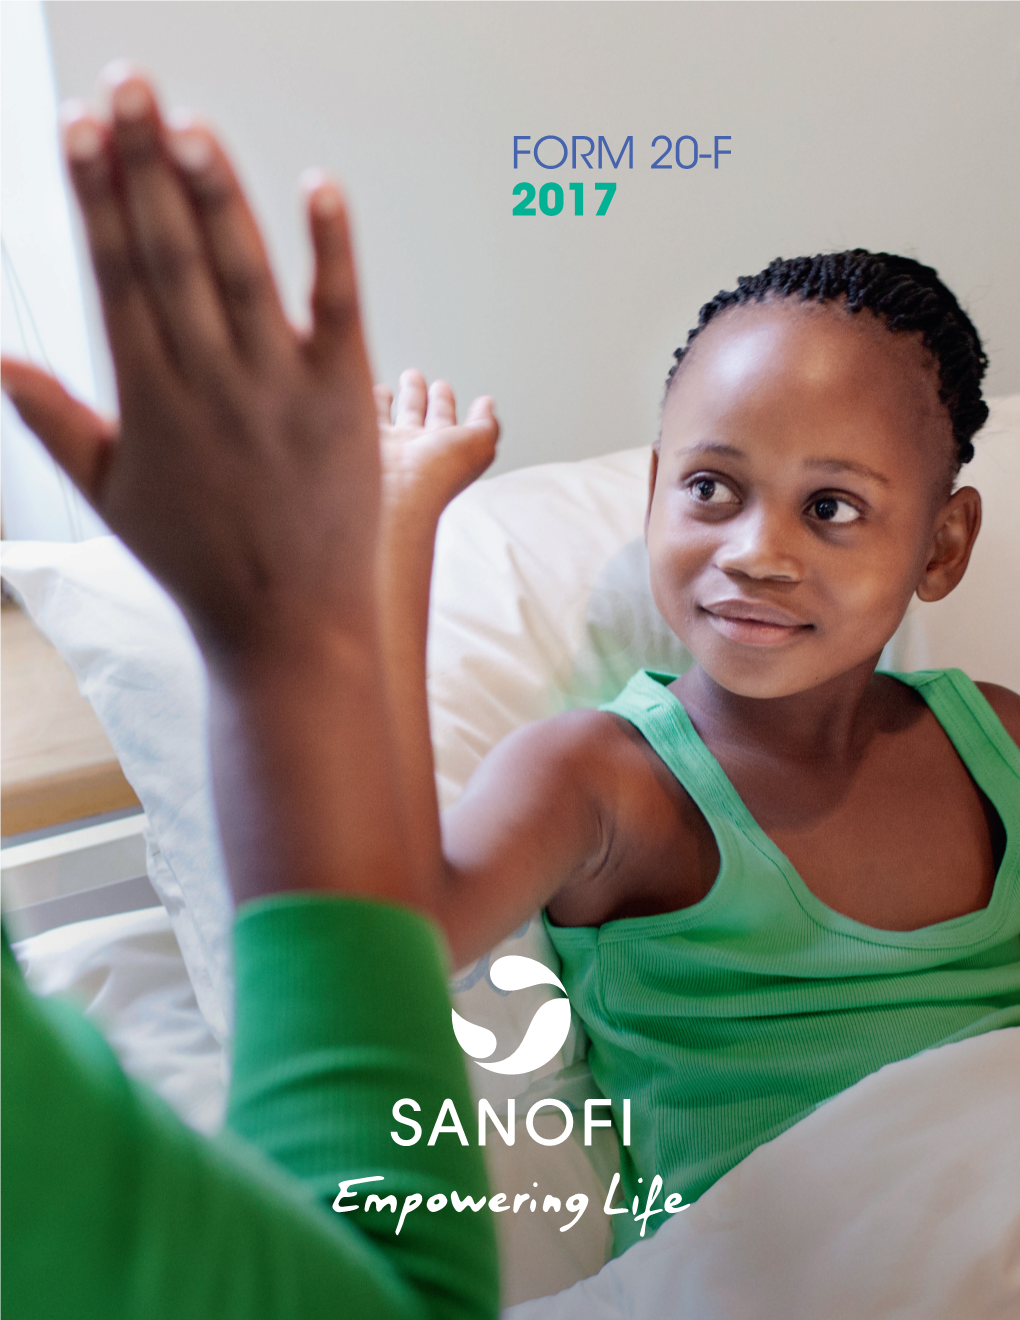 2017 Annual Report on Form